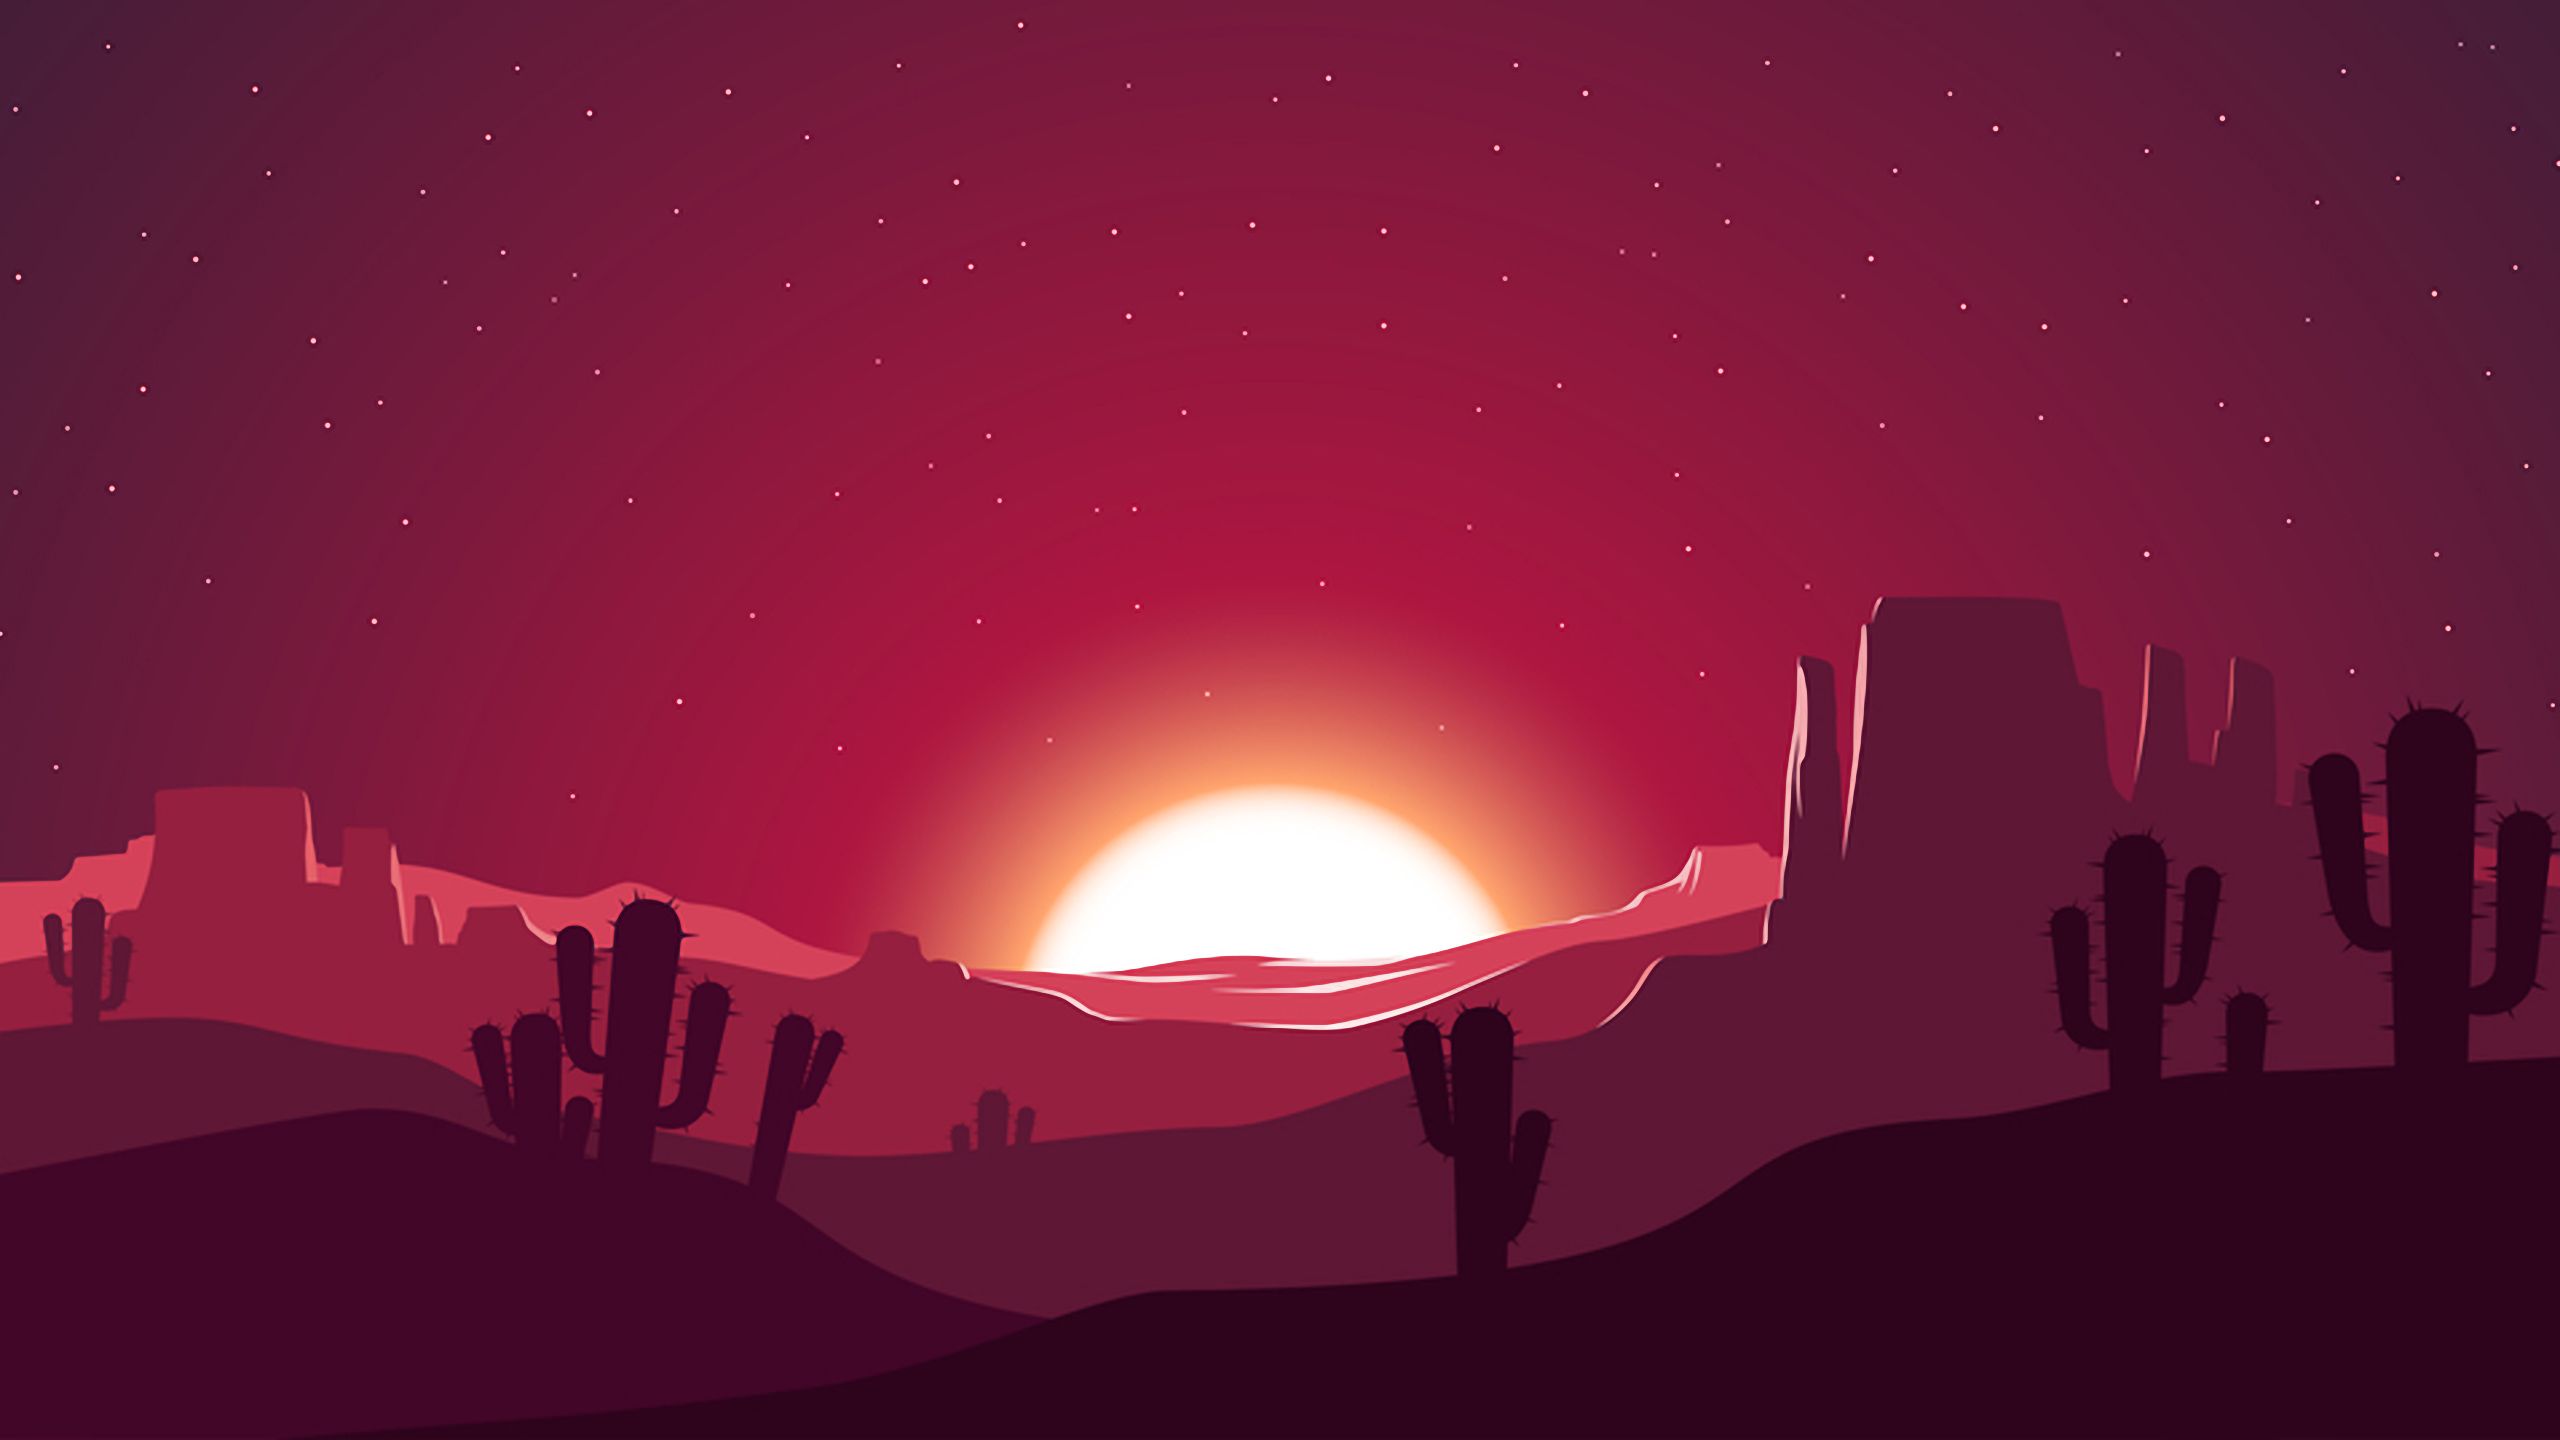 Cactus Sunset Desert Stars Landscape Silhouette, HD Artist, 4k Wallpaper, Image, Background, Photo and Picture